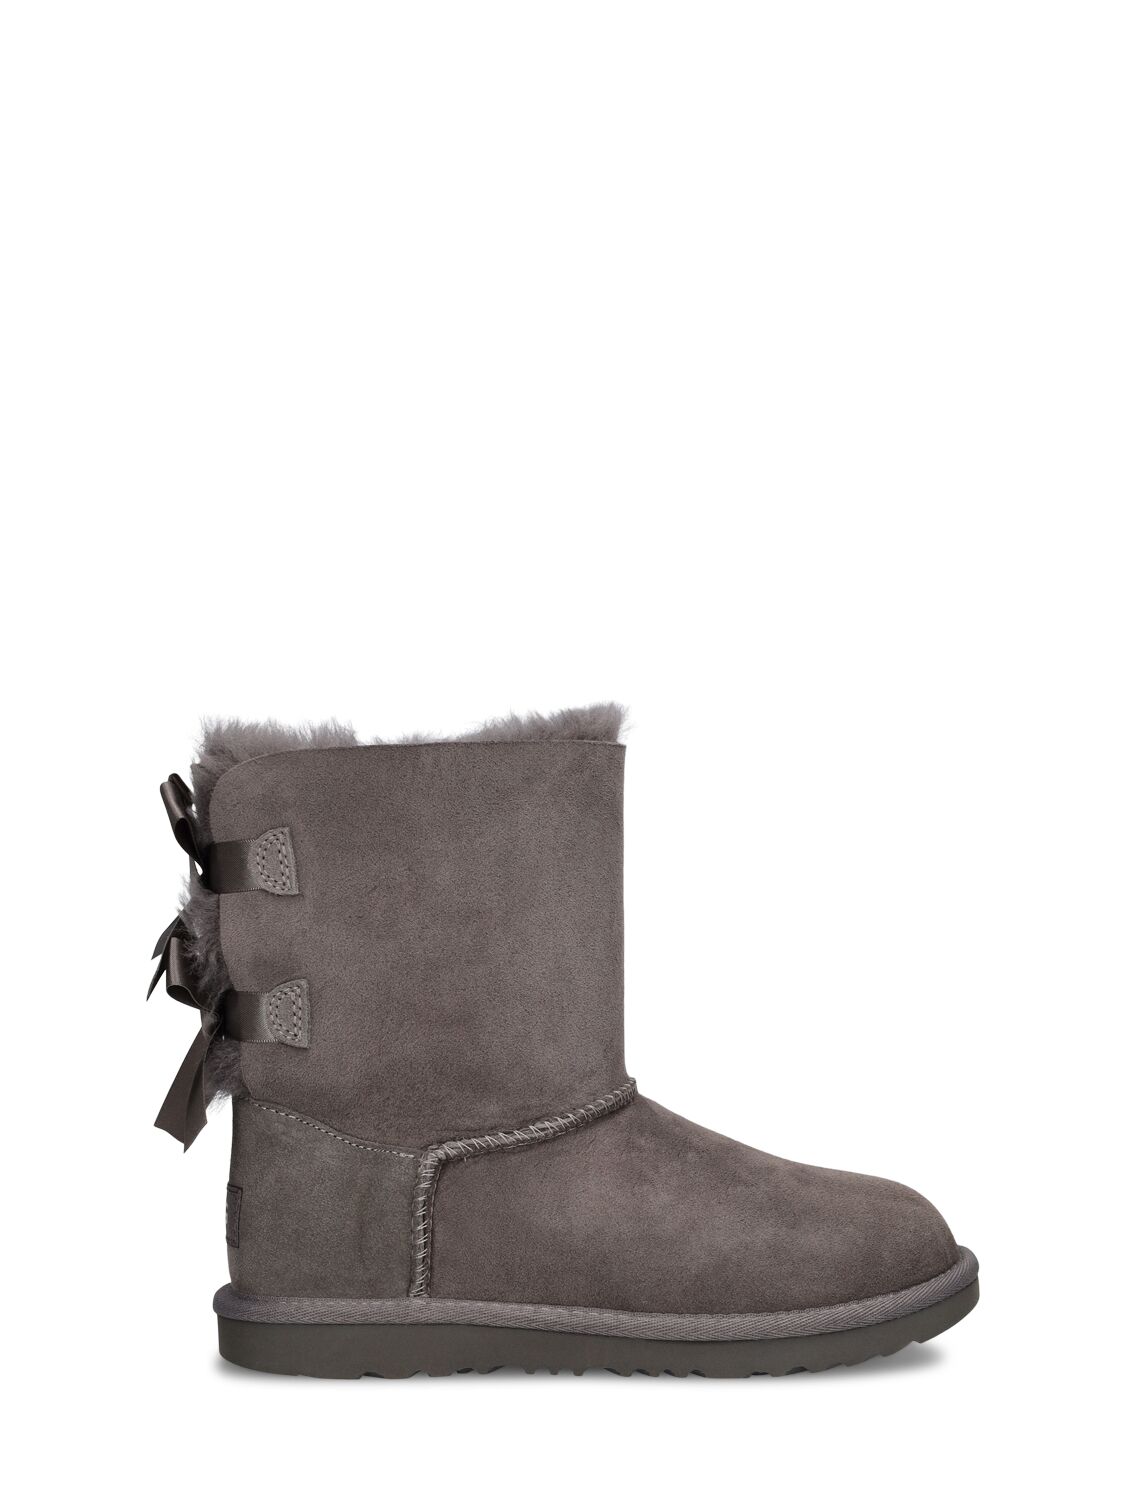 Image of Bailey Bow Ii Shearling Boots